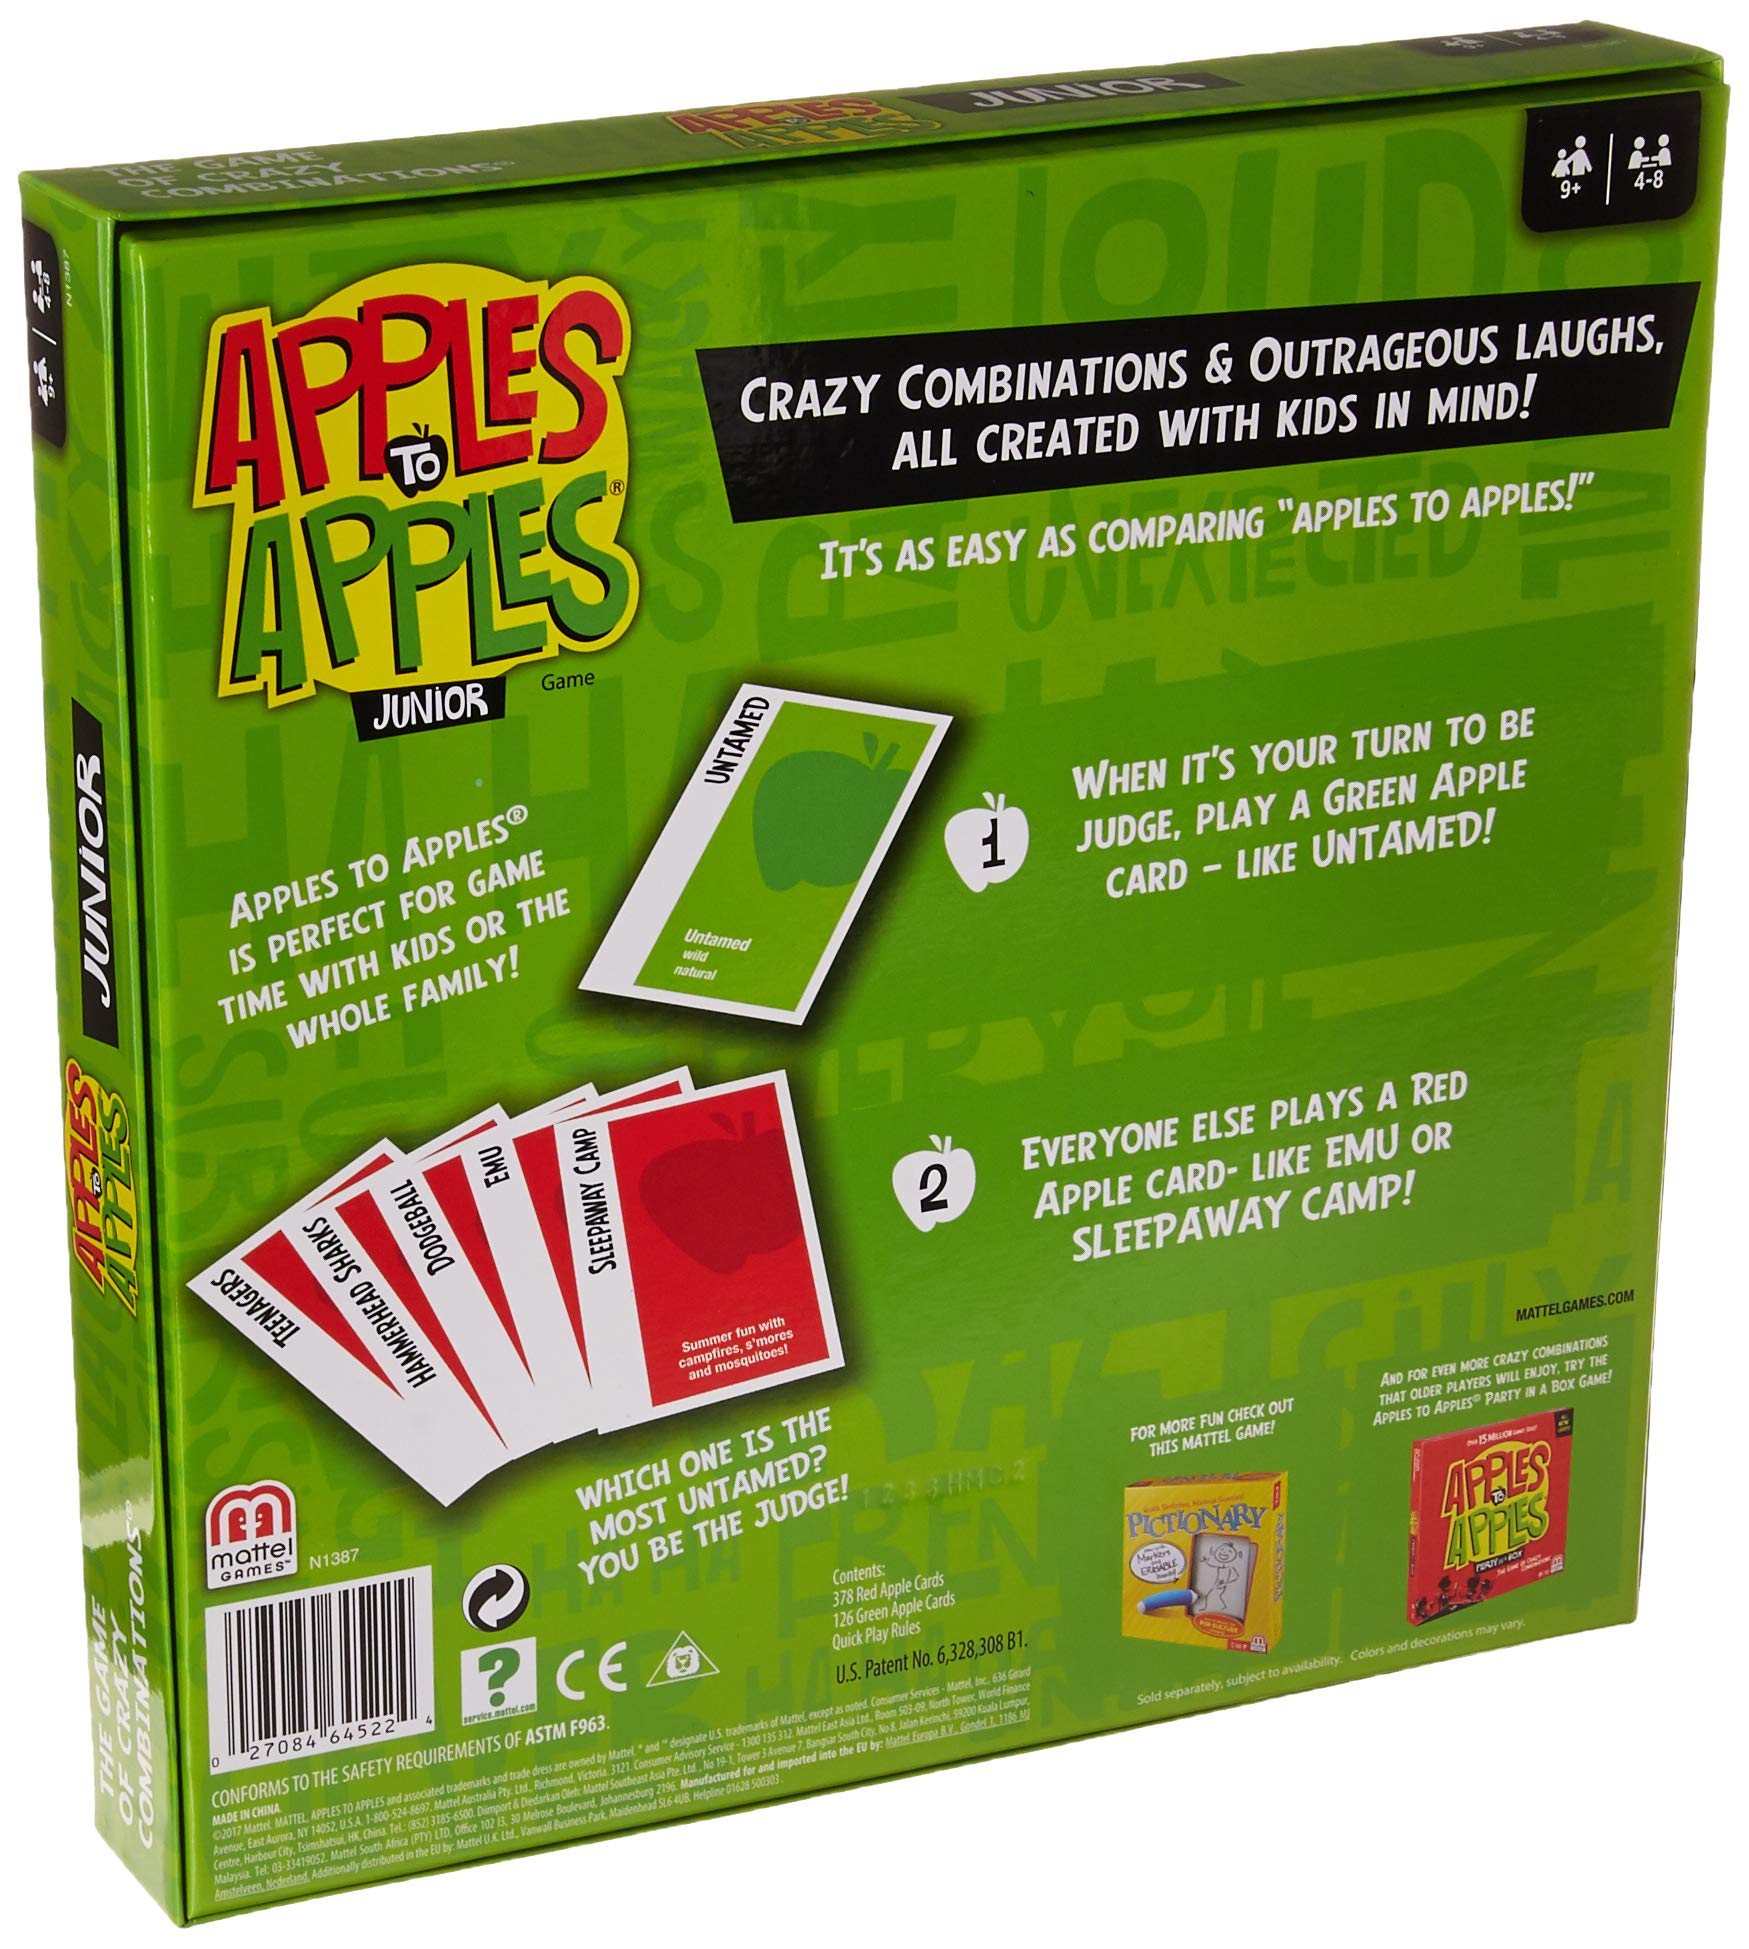 Apples to Apples [Discontinued by Manufacturer]